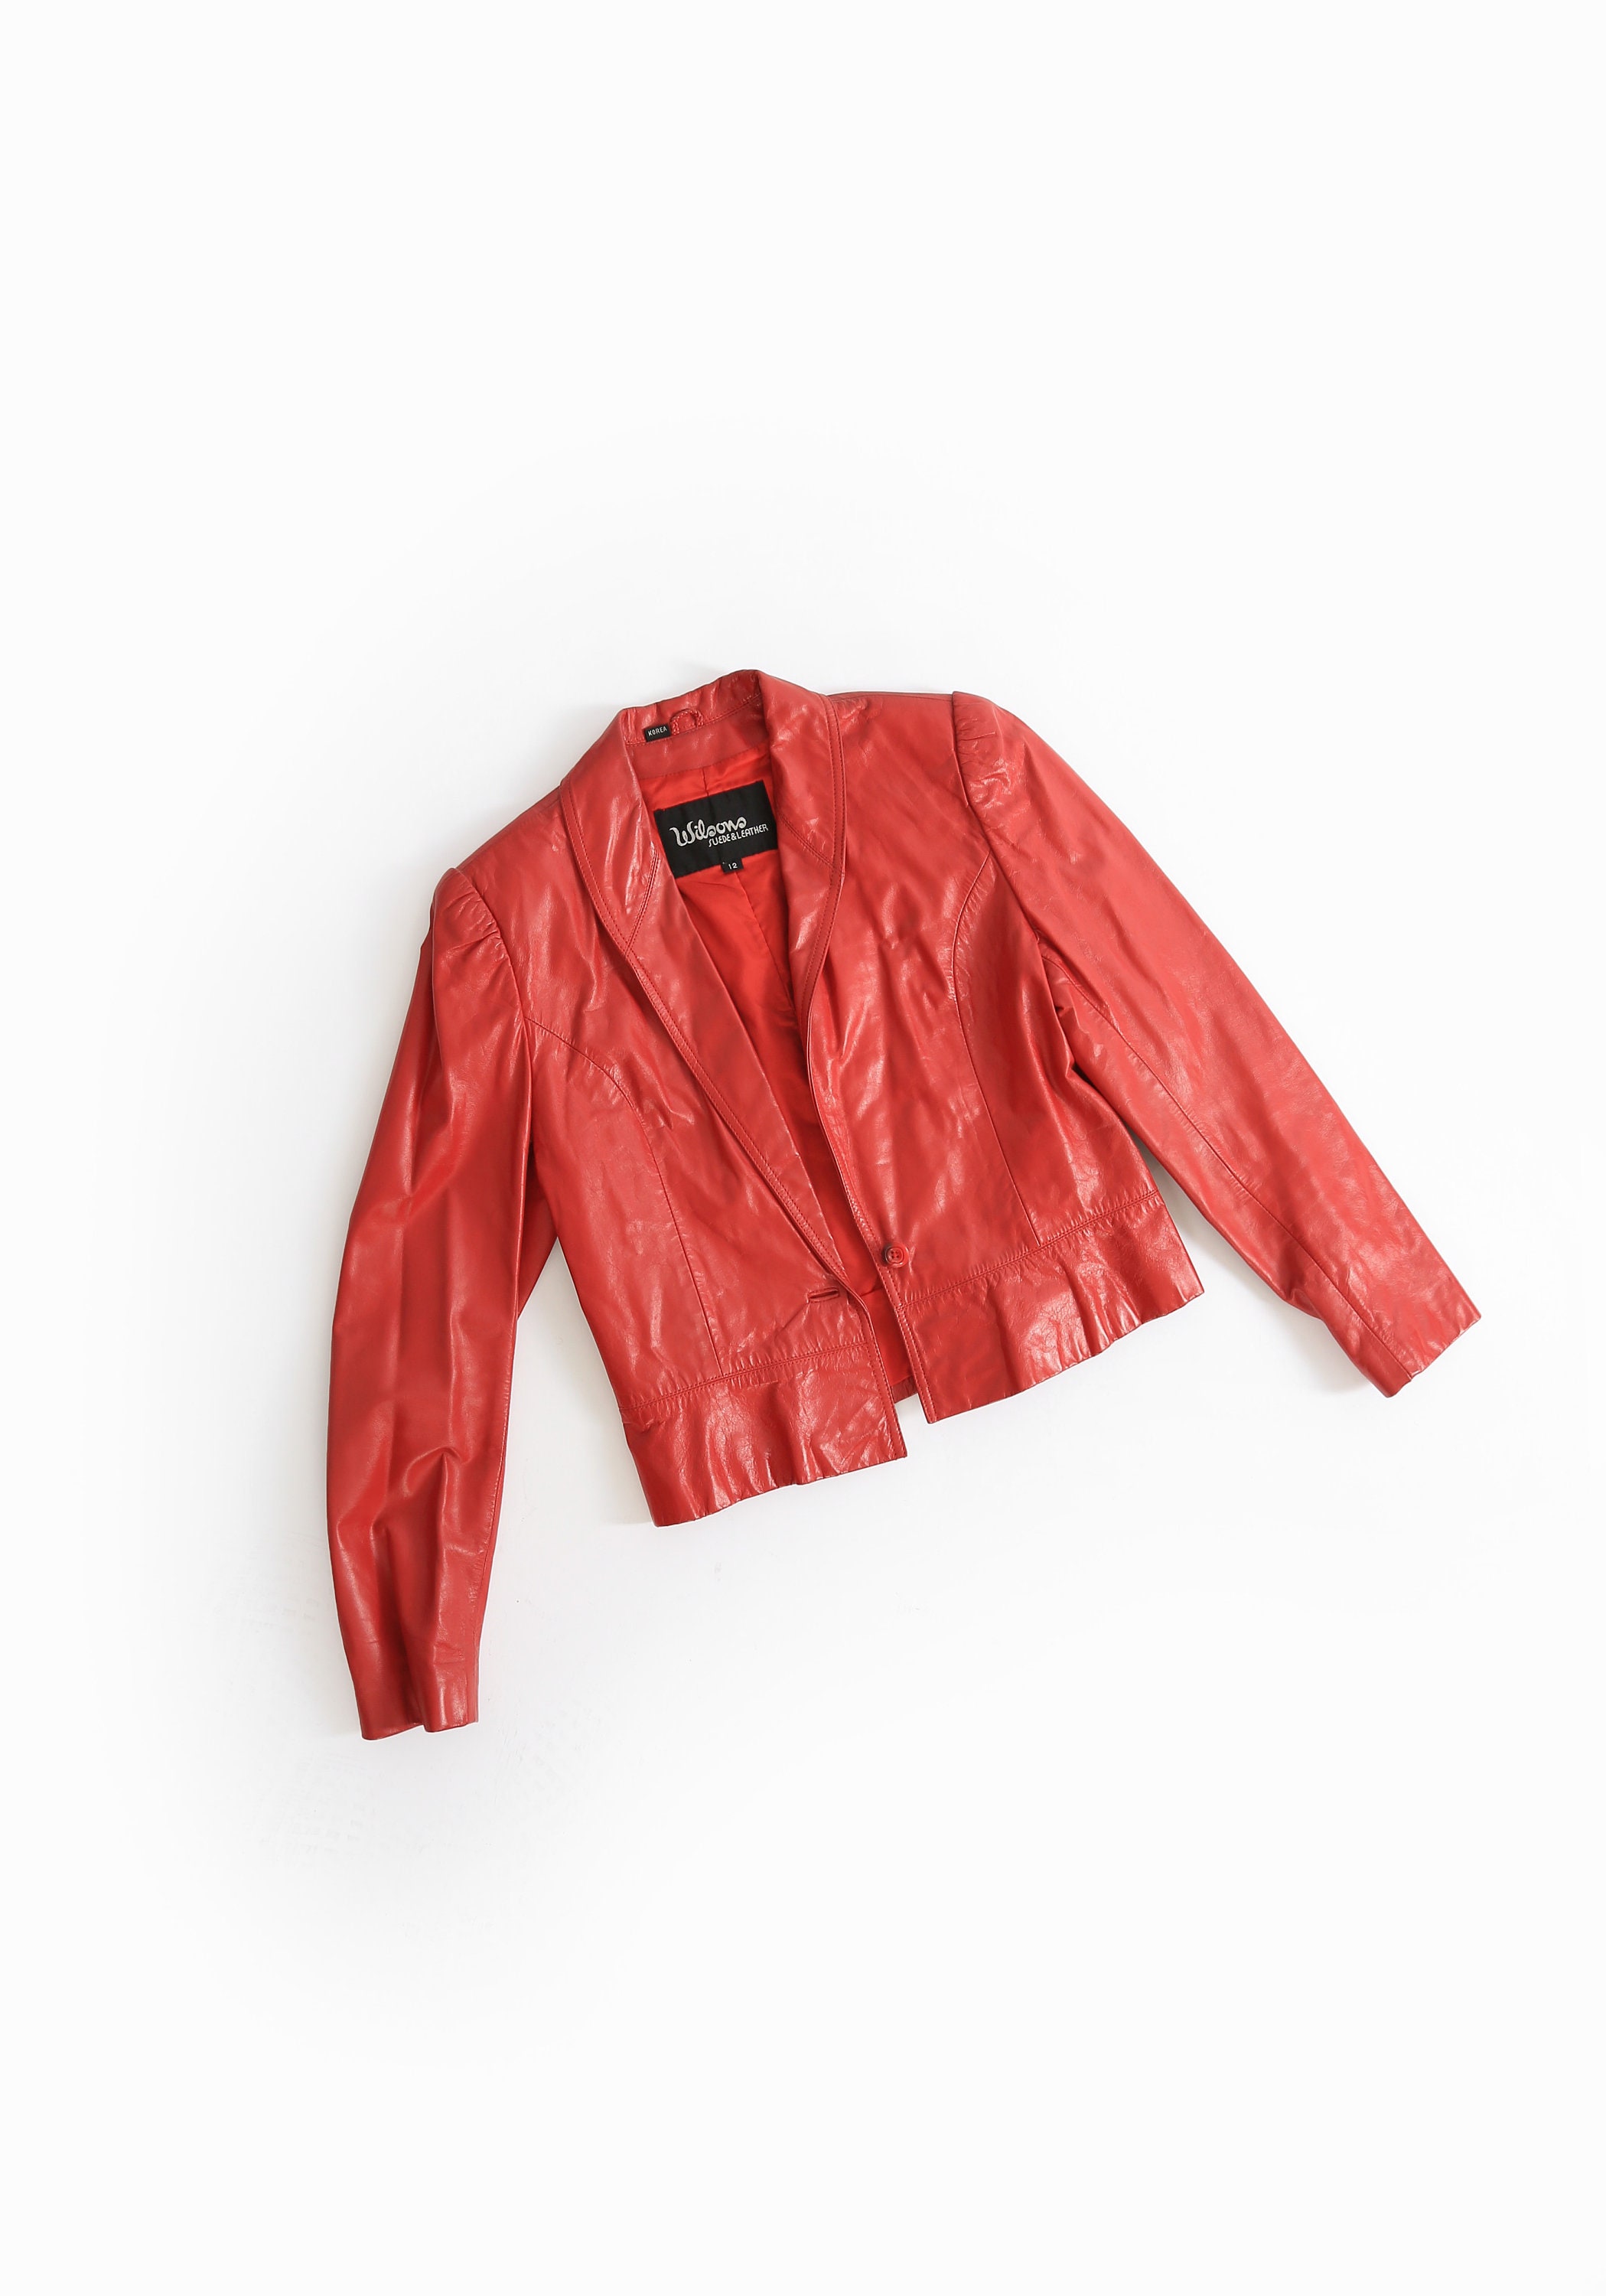 Etsy Wilsons Leather Jacket - Red